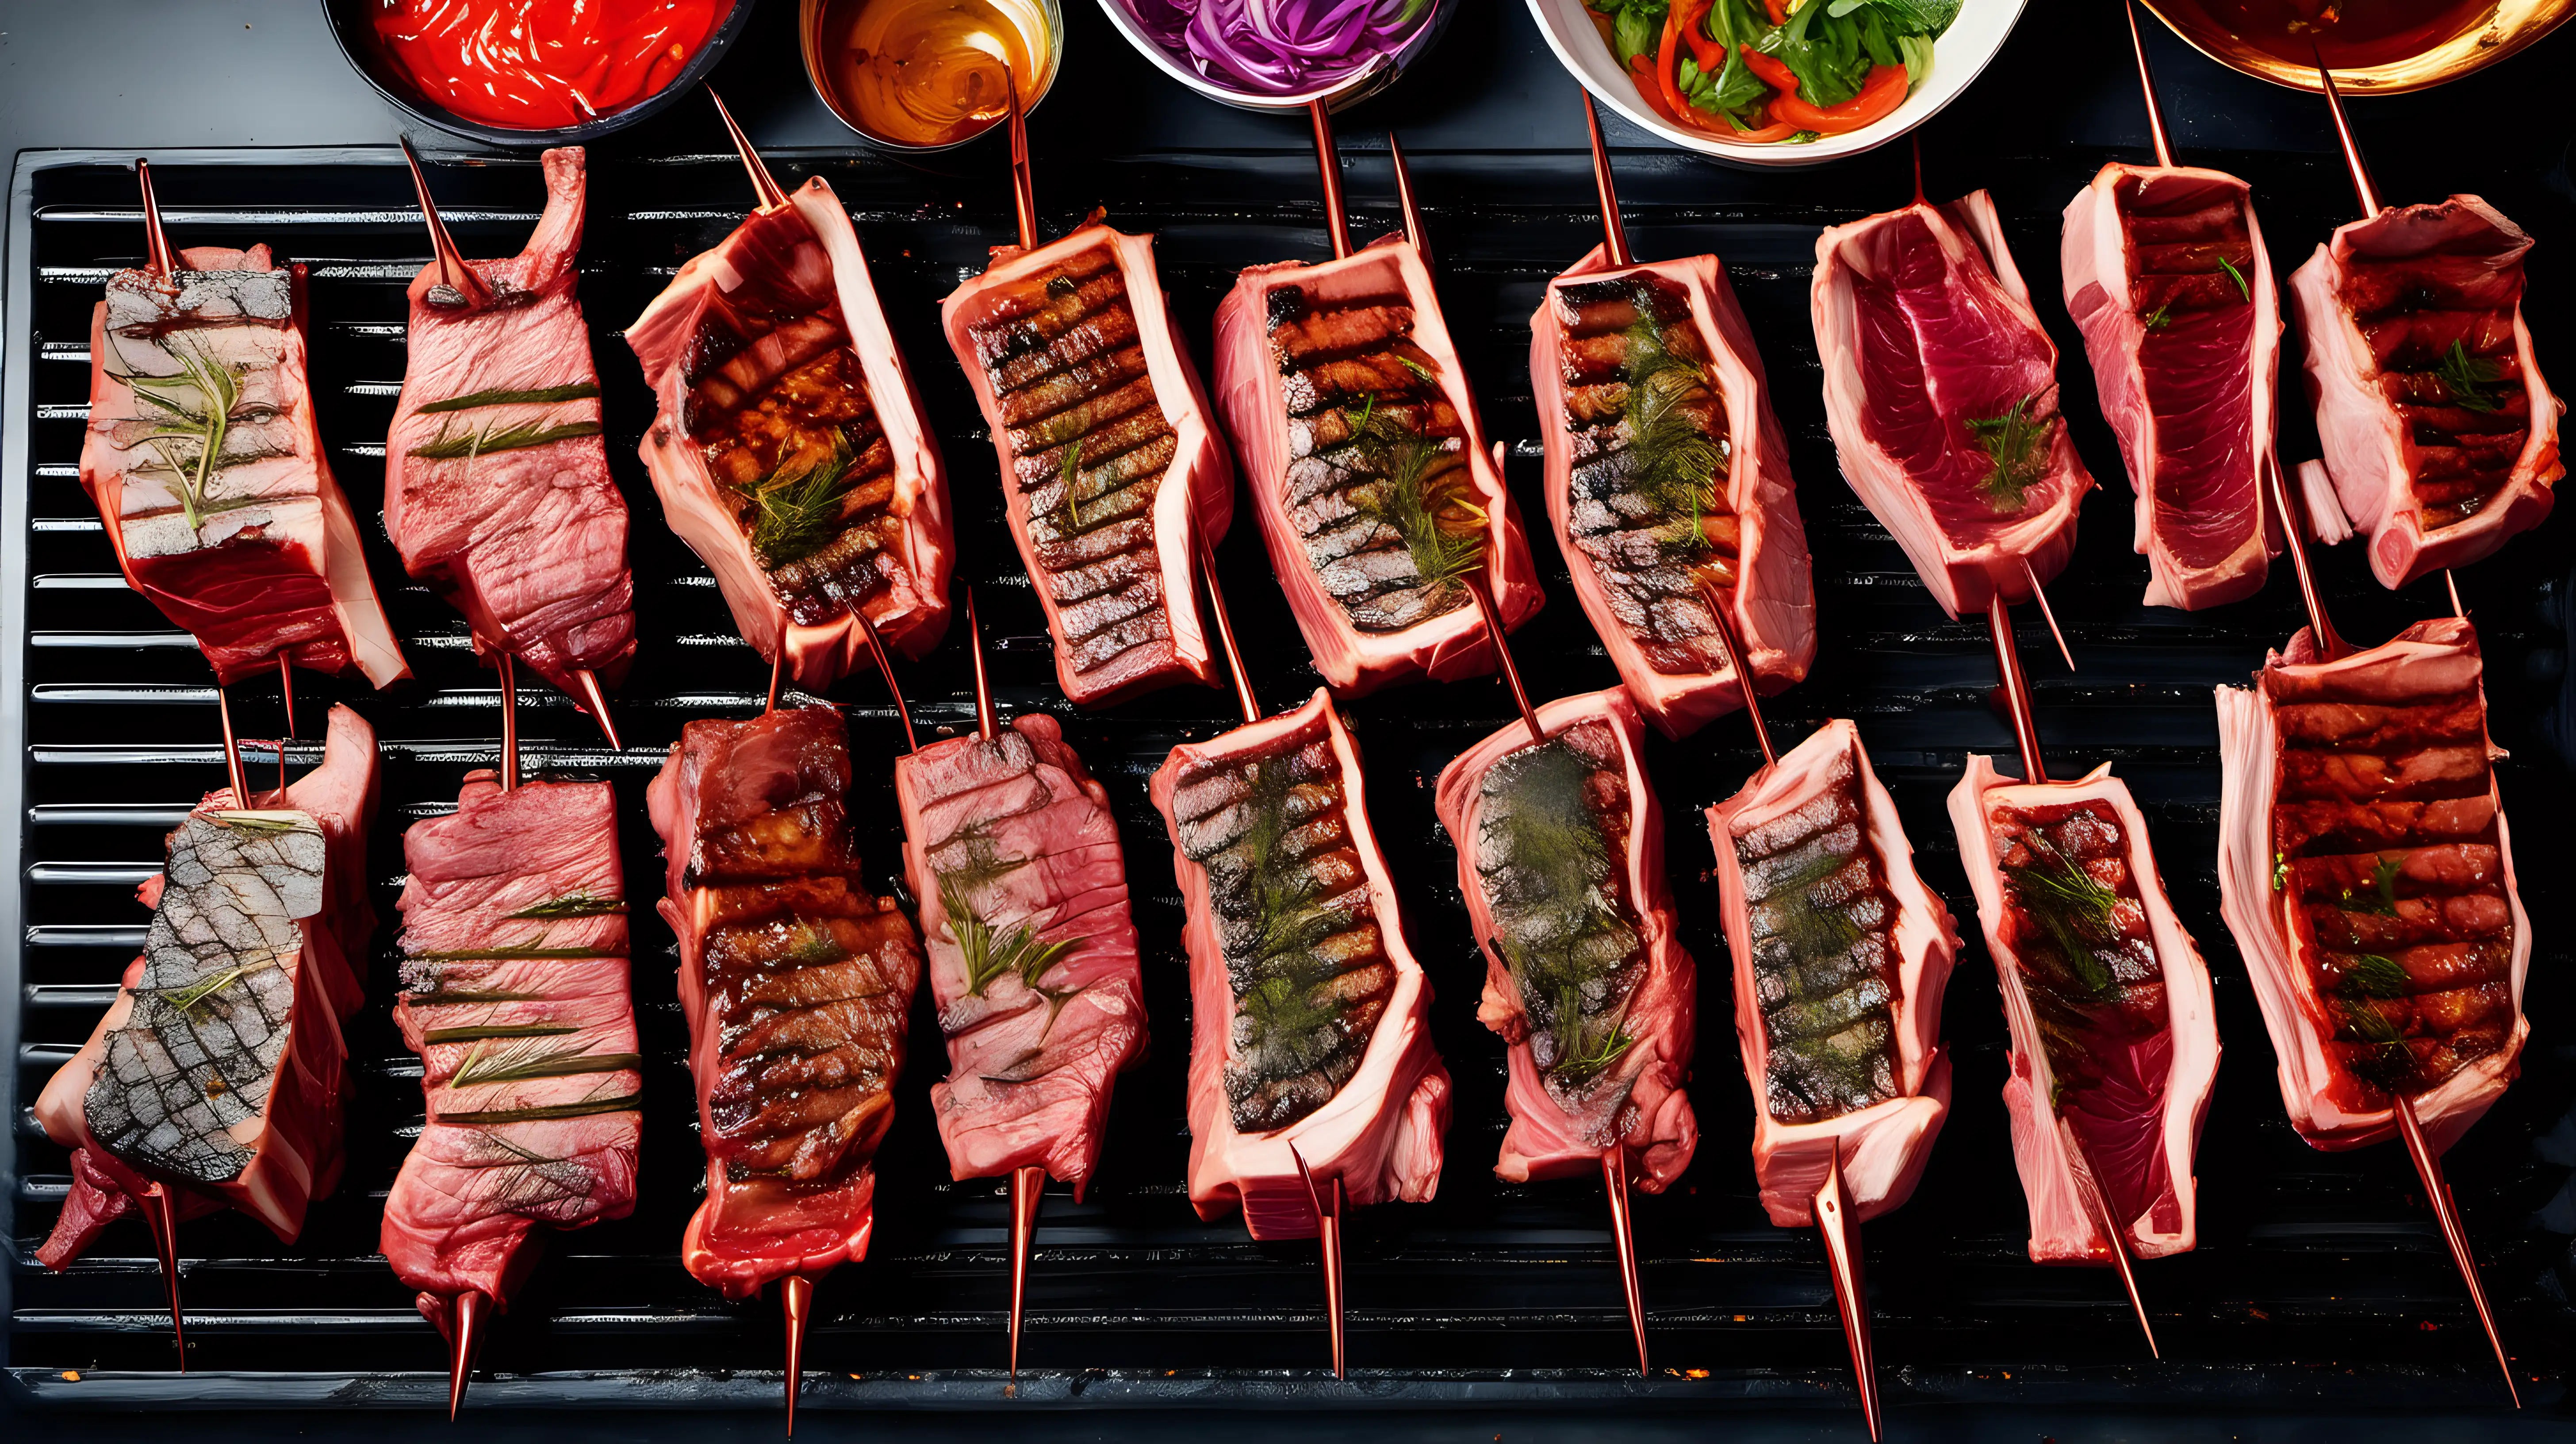 Grilling Marinated Meat Showcasing Vibrant Colors and Textures